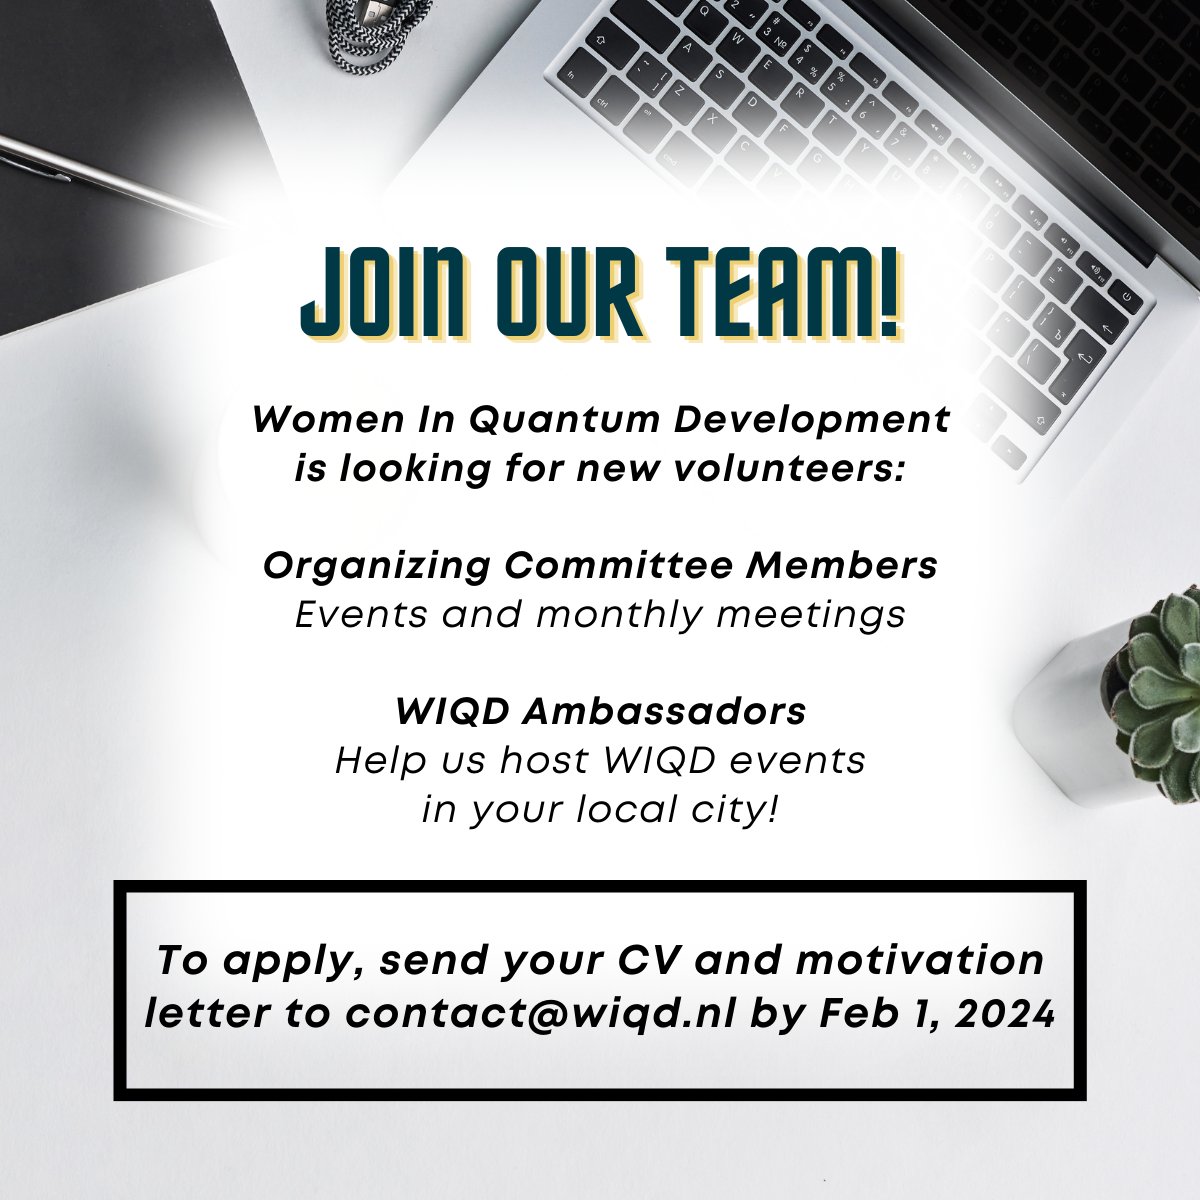 Help grow our community and cause by volunteering with WIQD! To apply for our organizing committee and ambassador vacancies, email your CV and motivation letter to contact@wiqd.nl by Feb 1. For questions, email contact@wiqd.nl and visit wiqd.nl/vacancies/